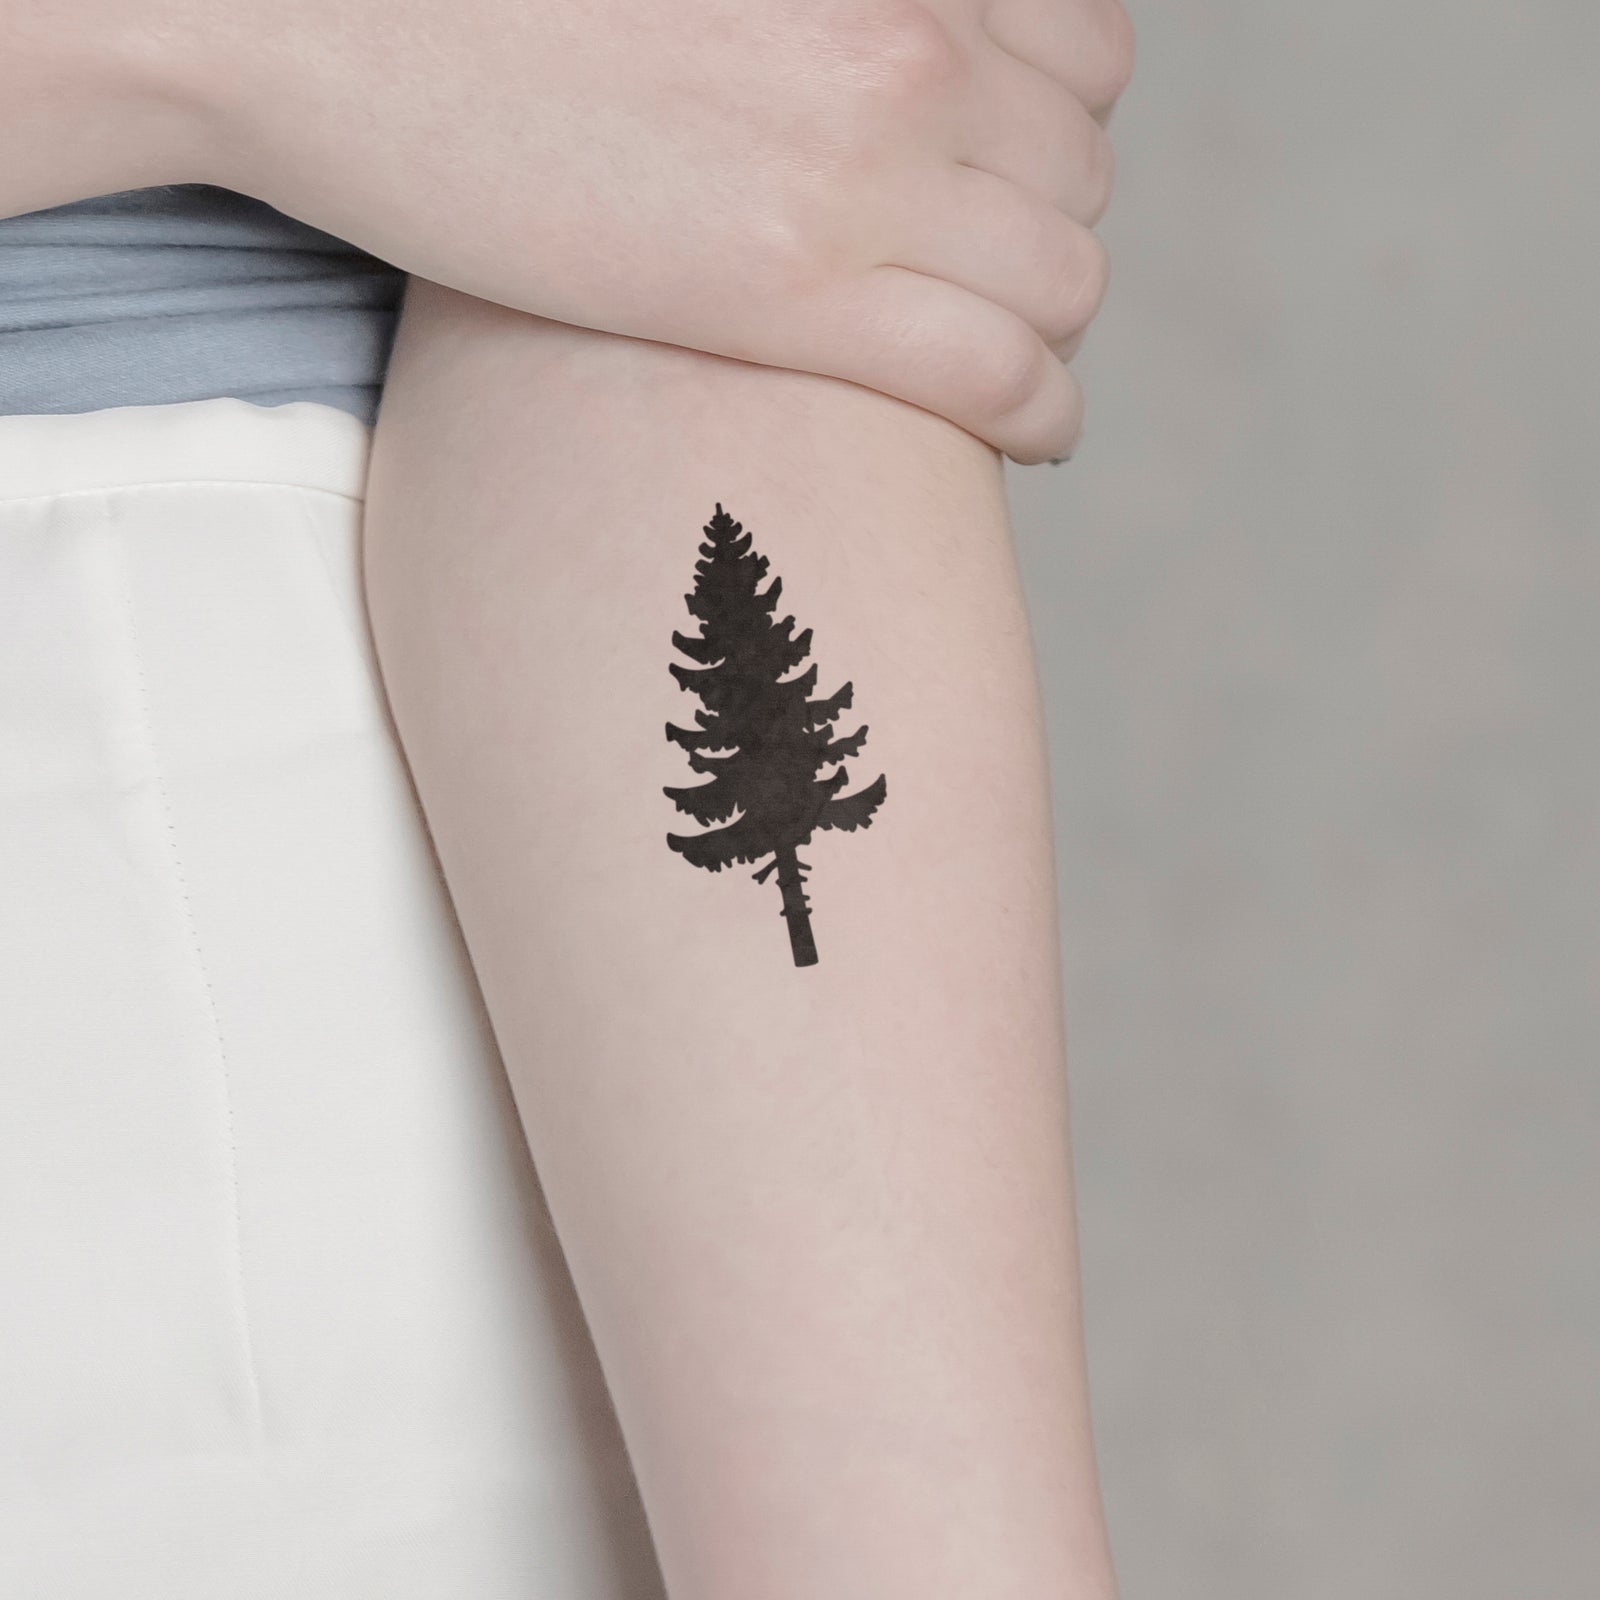 Tree Tattoo Design Ideas Vol 2:Amazon.com:Appstore for Android